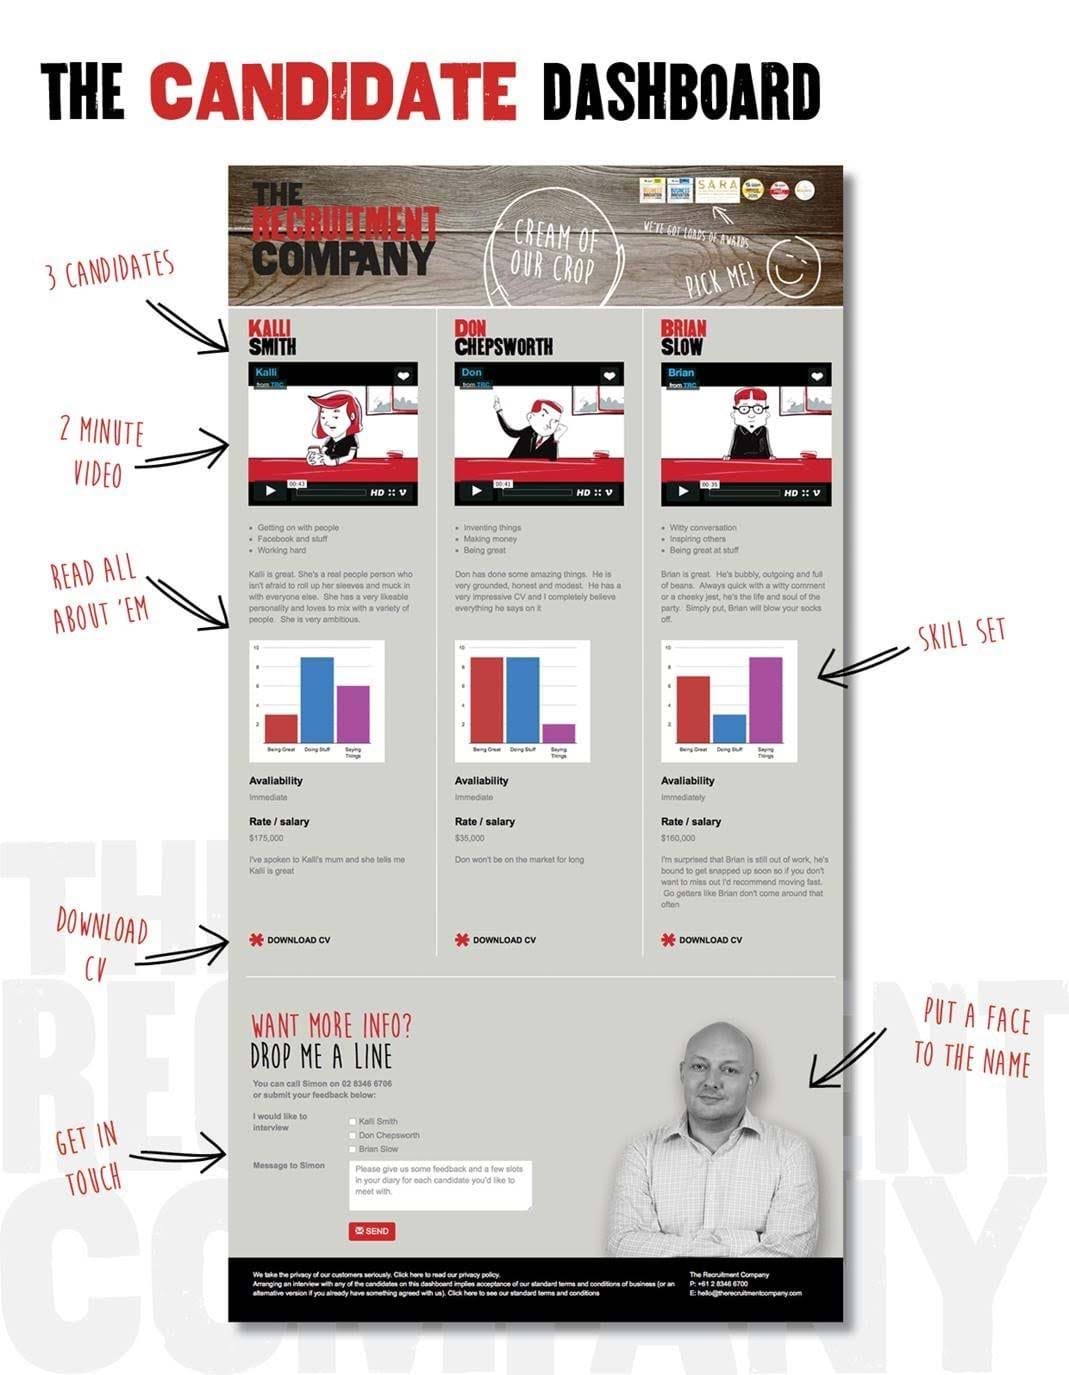 Candidate dashboard that won an Australian business award for innovation 2016